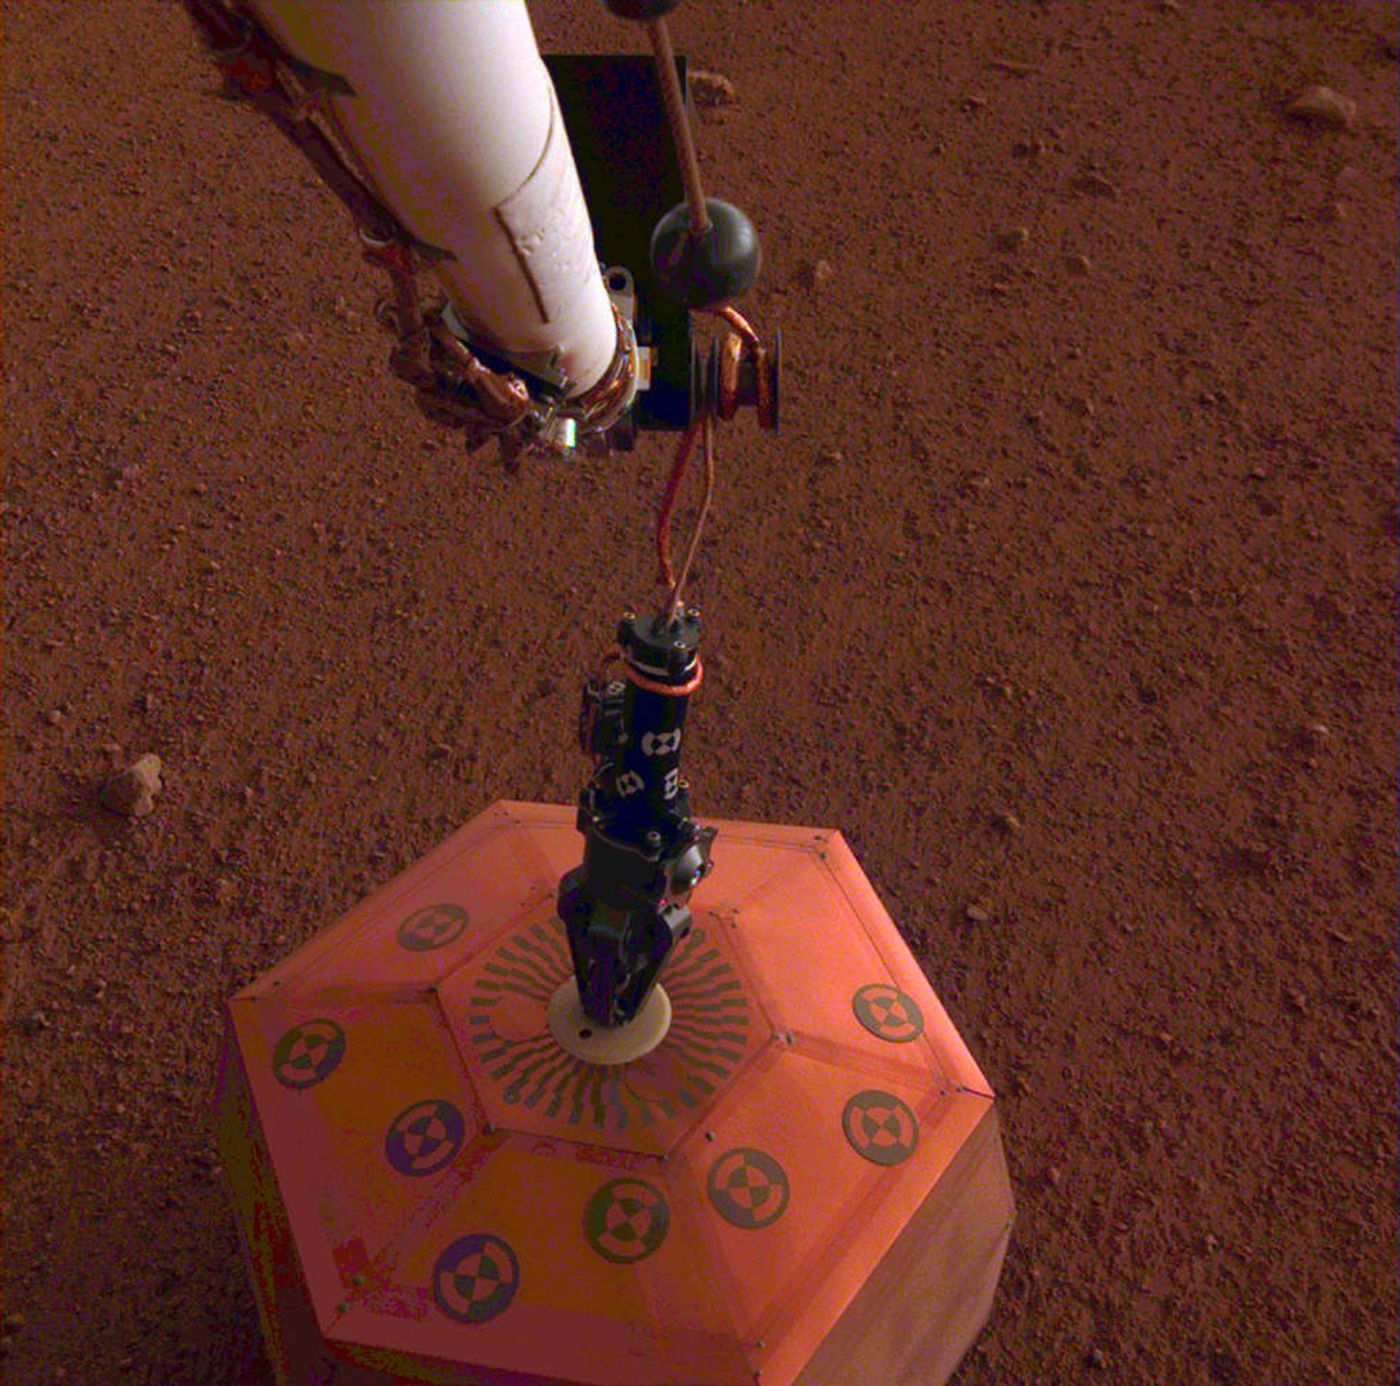 A picture of InSight's SEIS instrument in the soil beside the lander.